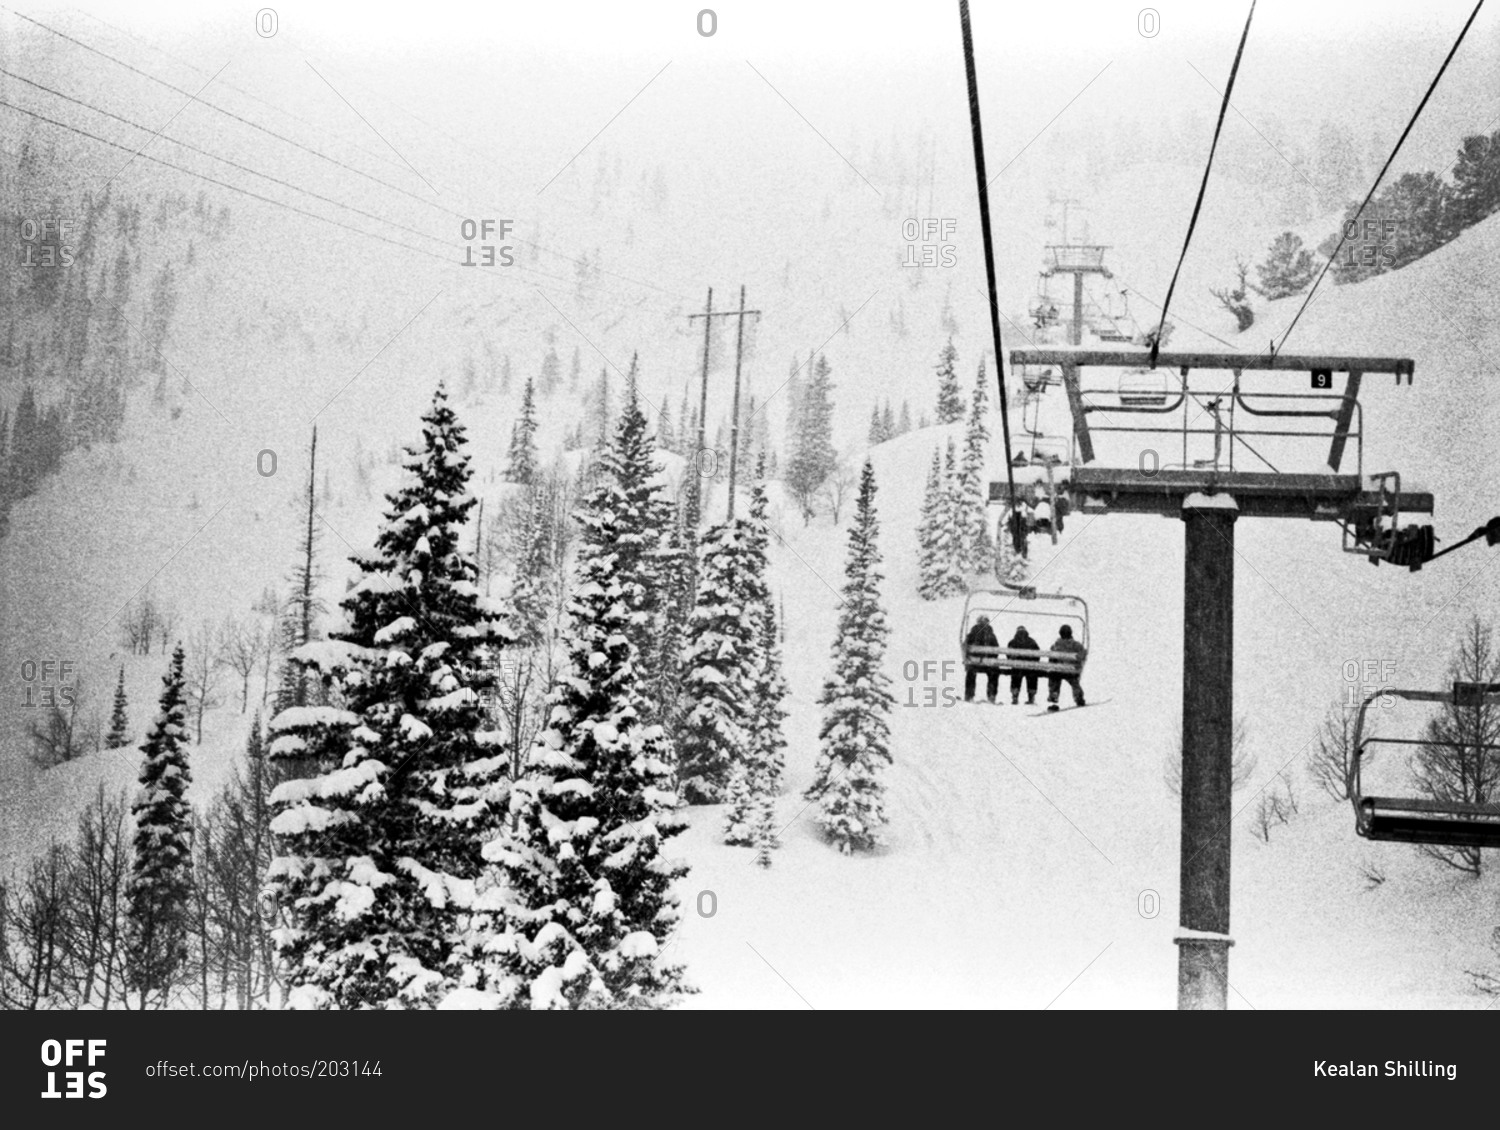 People riding ski lift up snowy slope